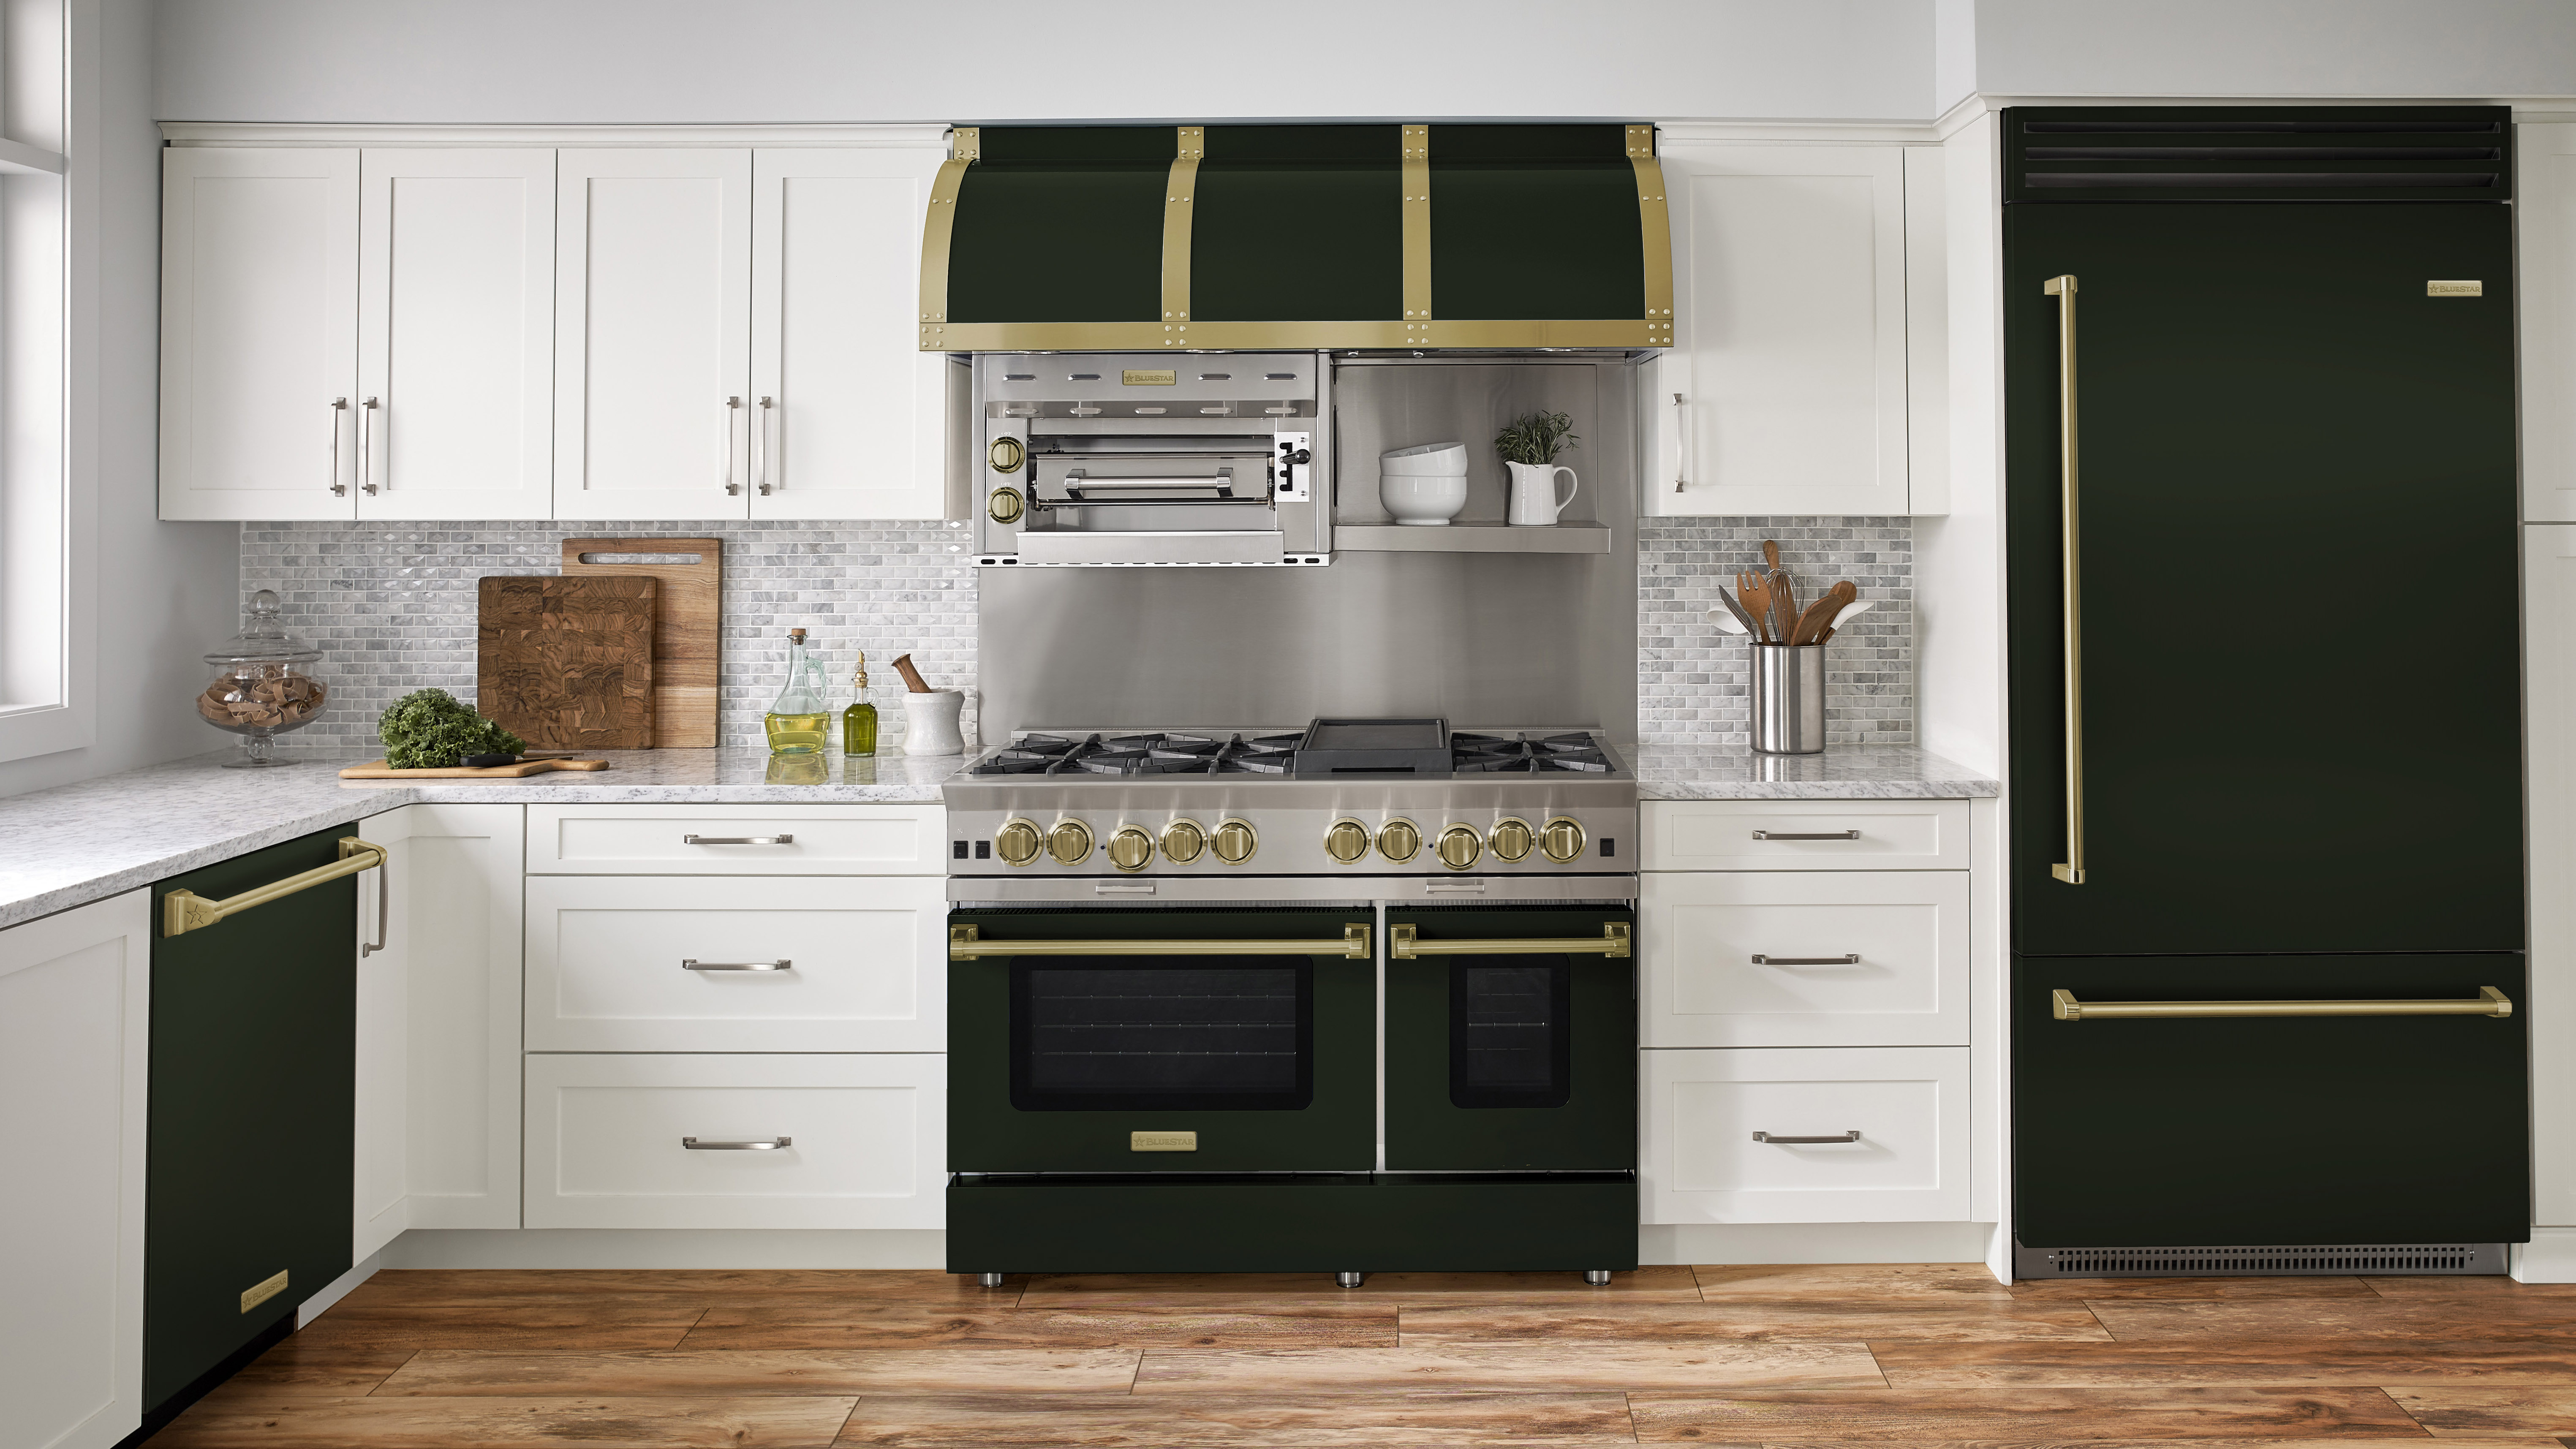 Green kitchen appliances are trending – here's why